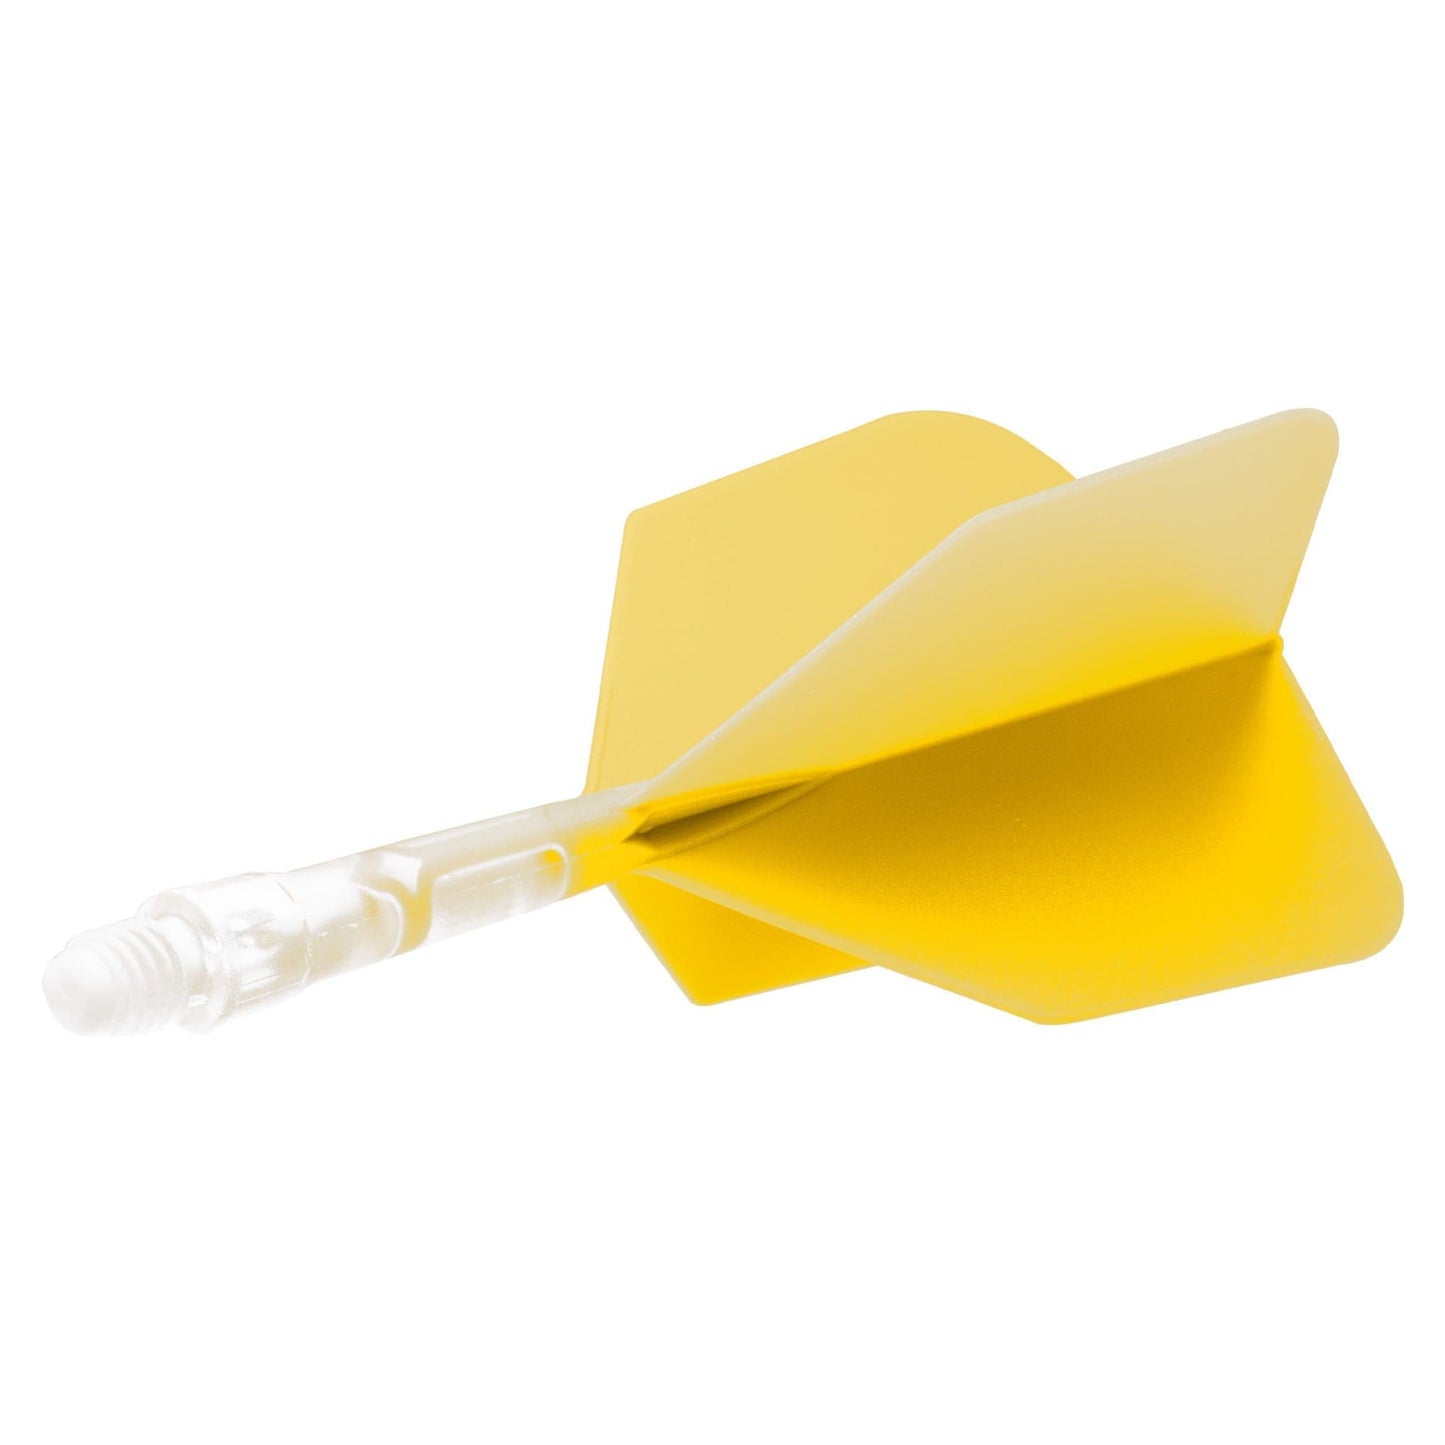 Cuesoul Rost T19 Integrated Dart Shaft and Flights - Big Wing - Clear with Yellow Flight